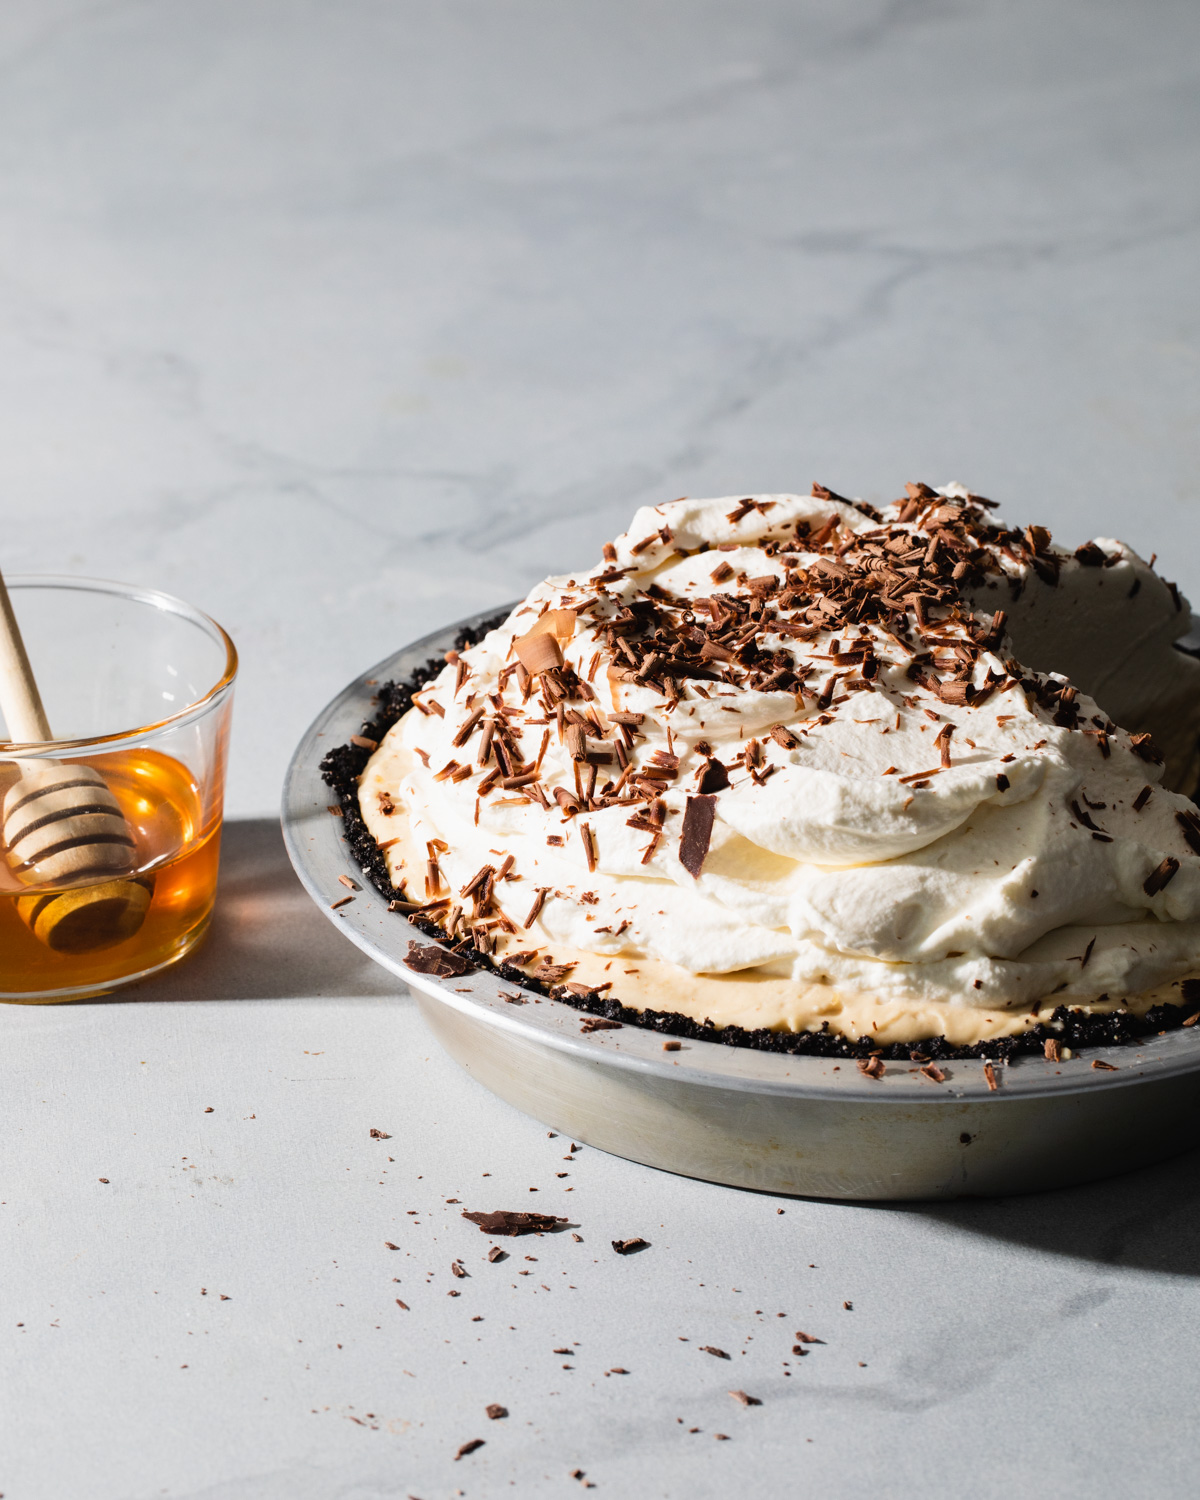 A no-bake peanut butter pie with salted honey whipped cream and chocolate shavings on top